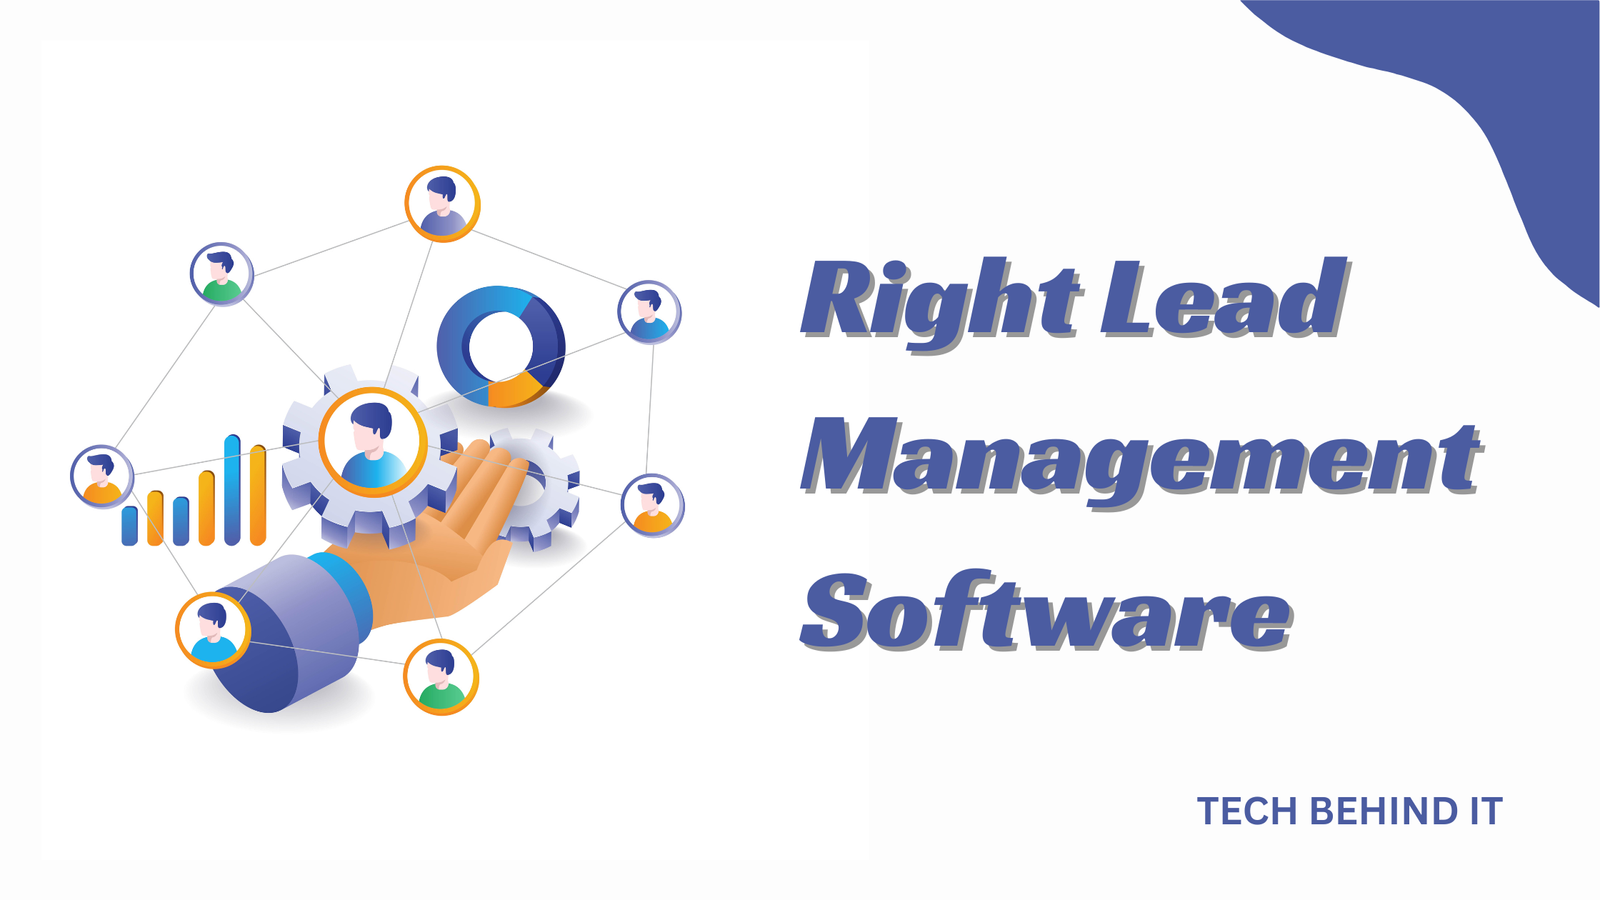 Right Lead Management Software